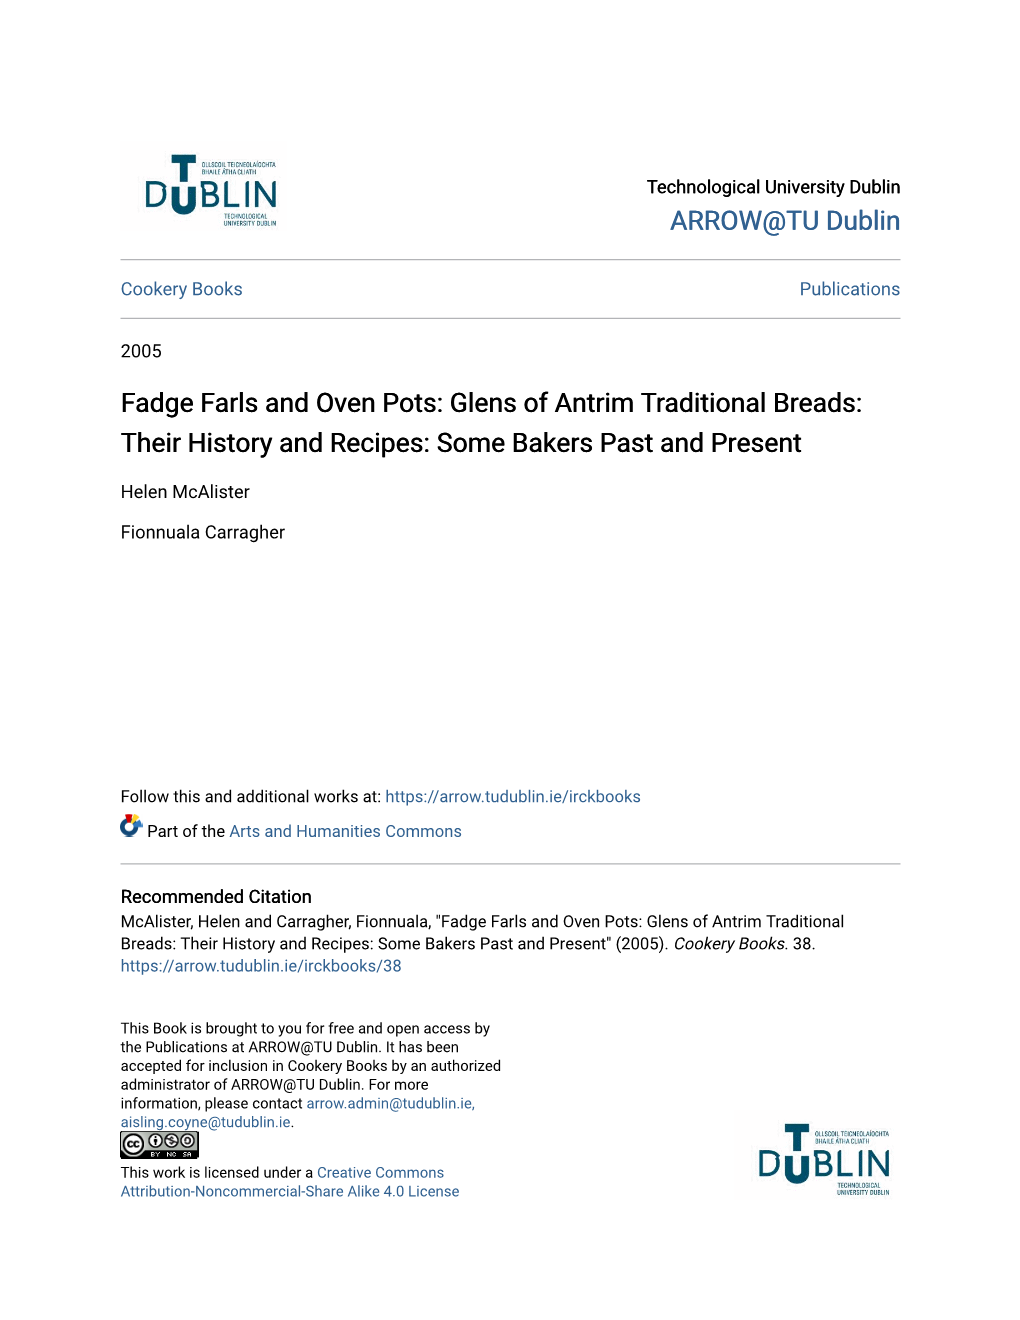 Fadge Farls and Oven Pots: Glens of Antrim Traditional Breads: Their History and Recipes: Some Bakers Past and Present